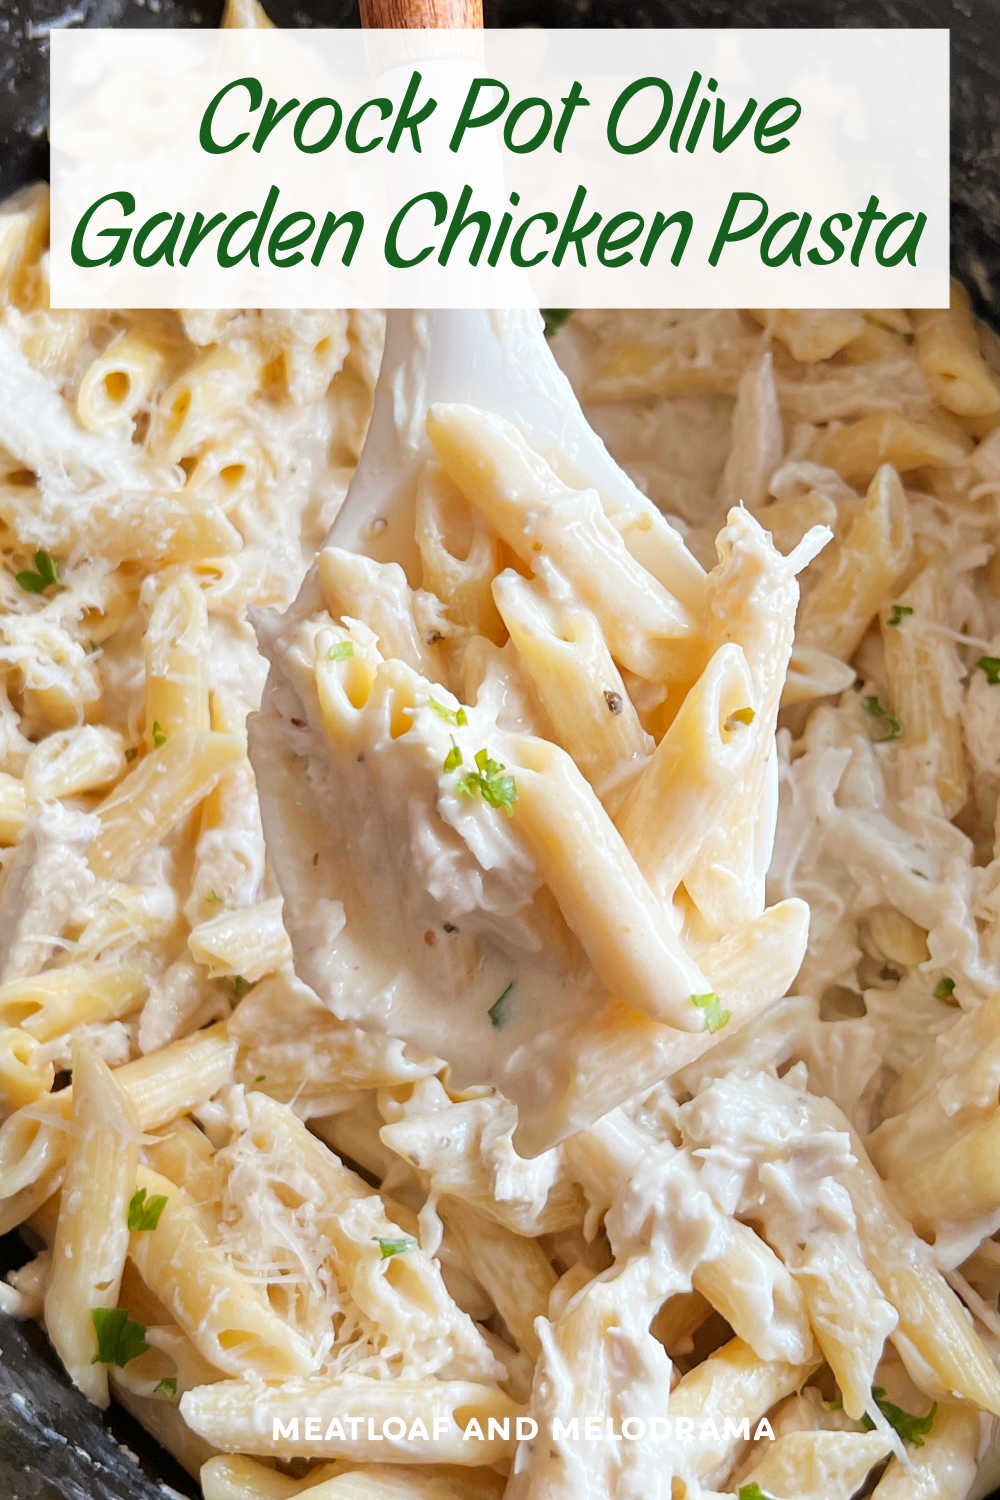 Crock Pot Olive Garden Chicken Pasta is an easy slow cooker chicken recipe with penne pasta cream cheese, Olive Garden dressing and Parmesan cheese. The whole family will love this easy meal -- perfect for busy weeknights! via @meamel